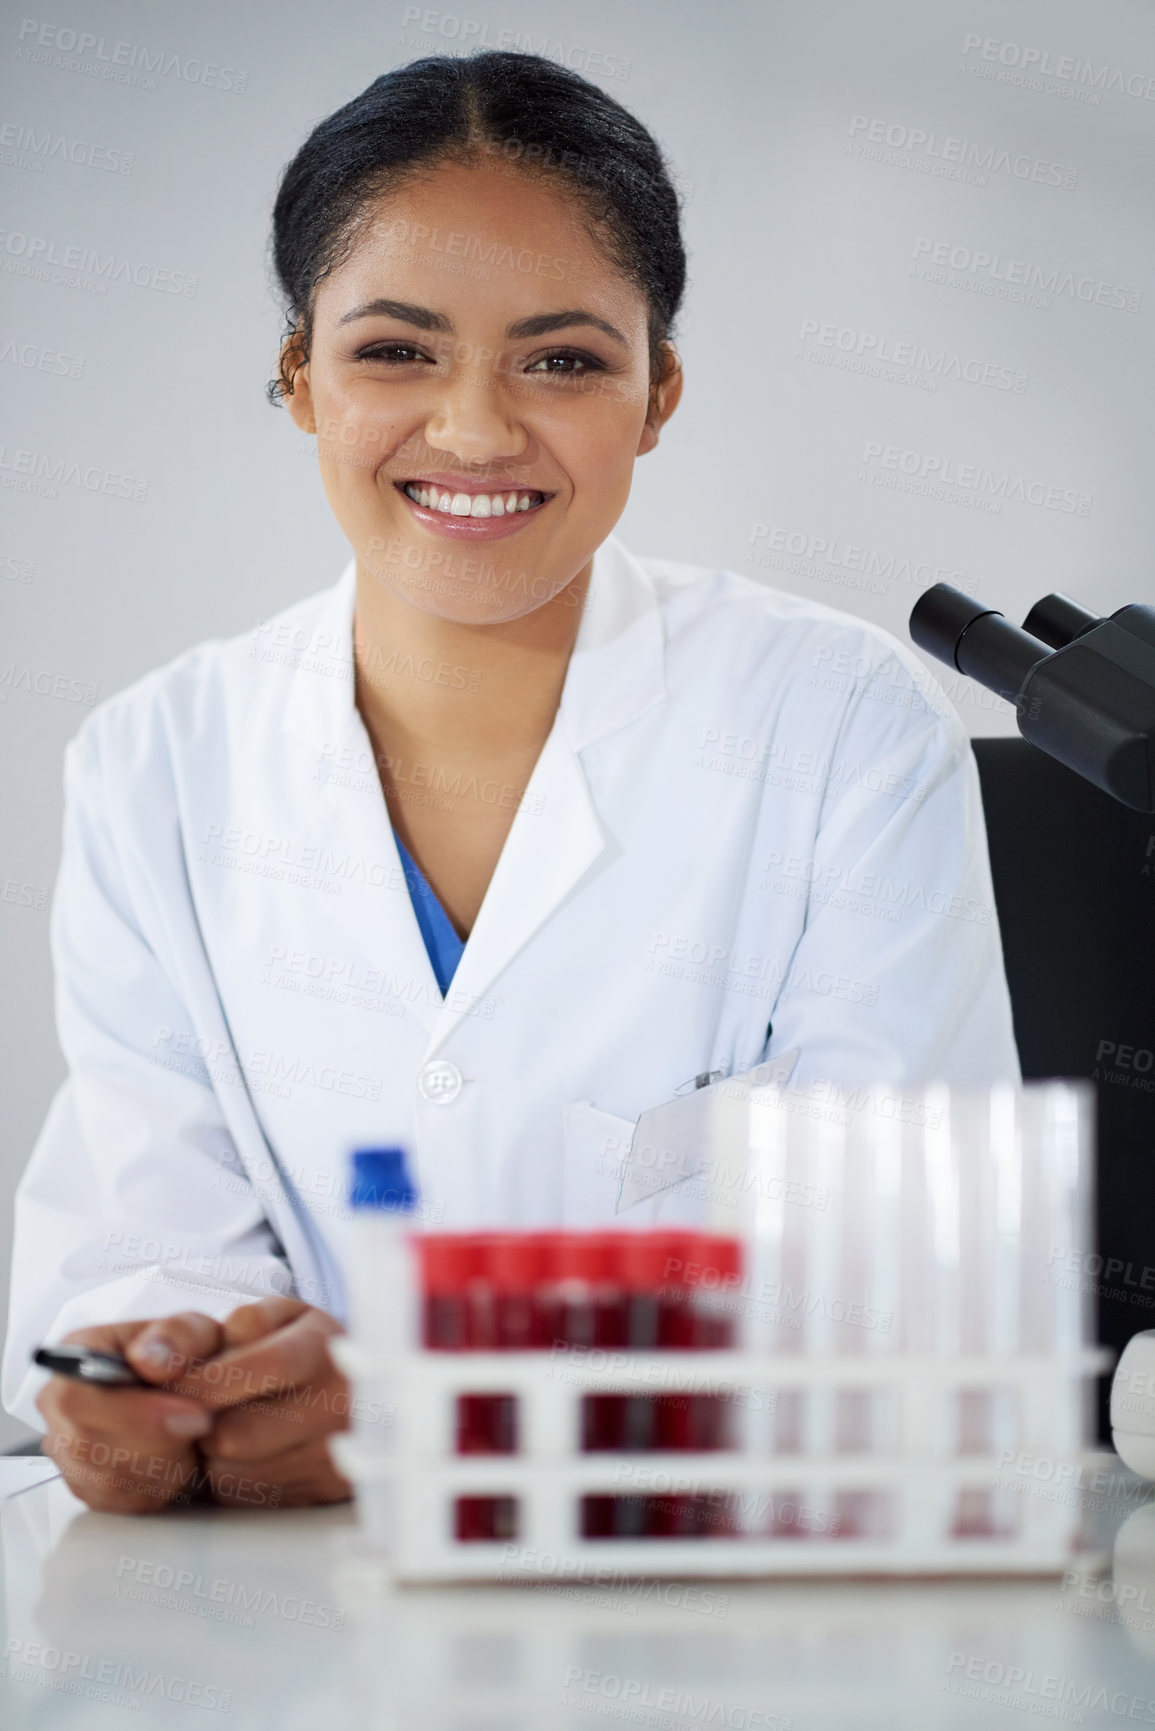 Buy stock photo Cropped portrait of an attractive young female scientist working in her lab